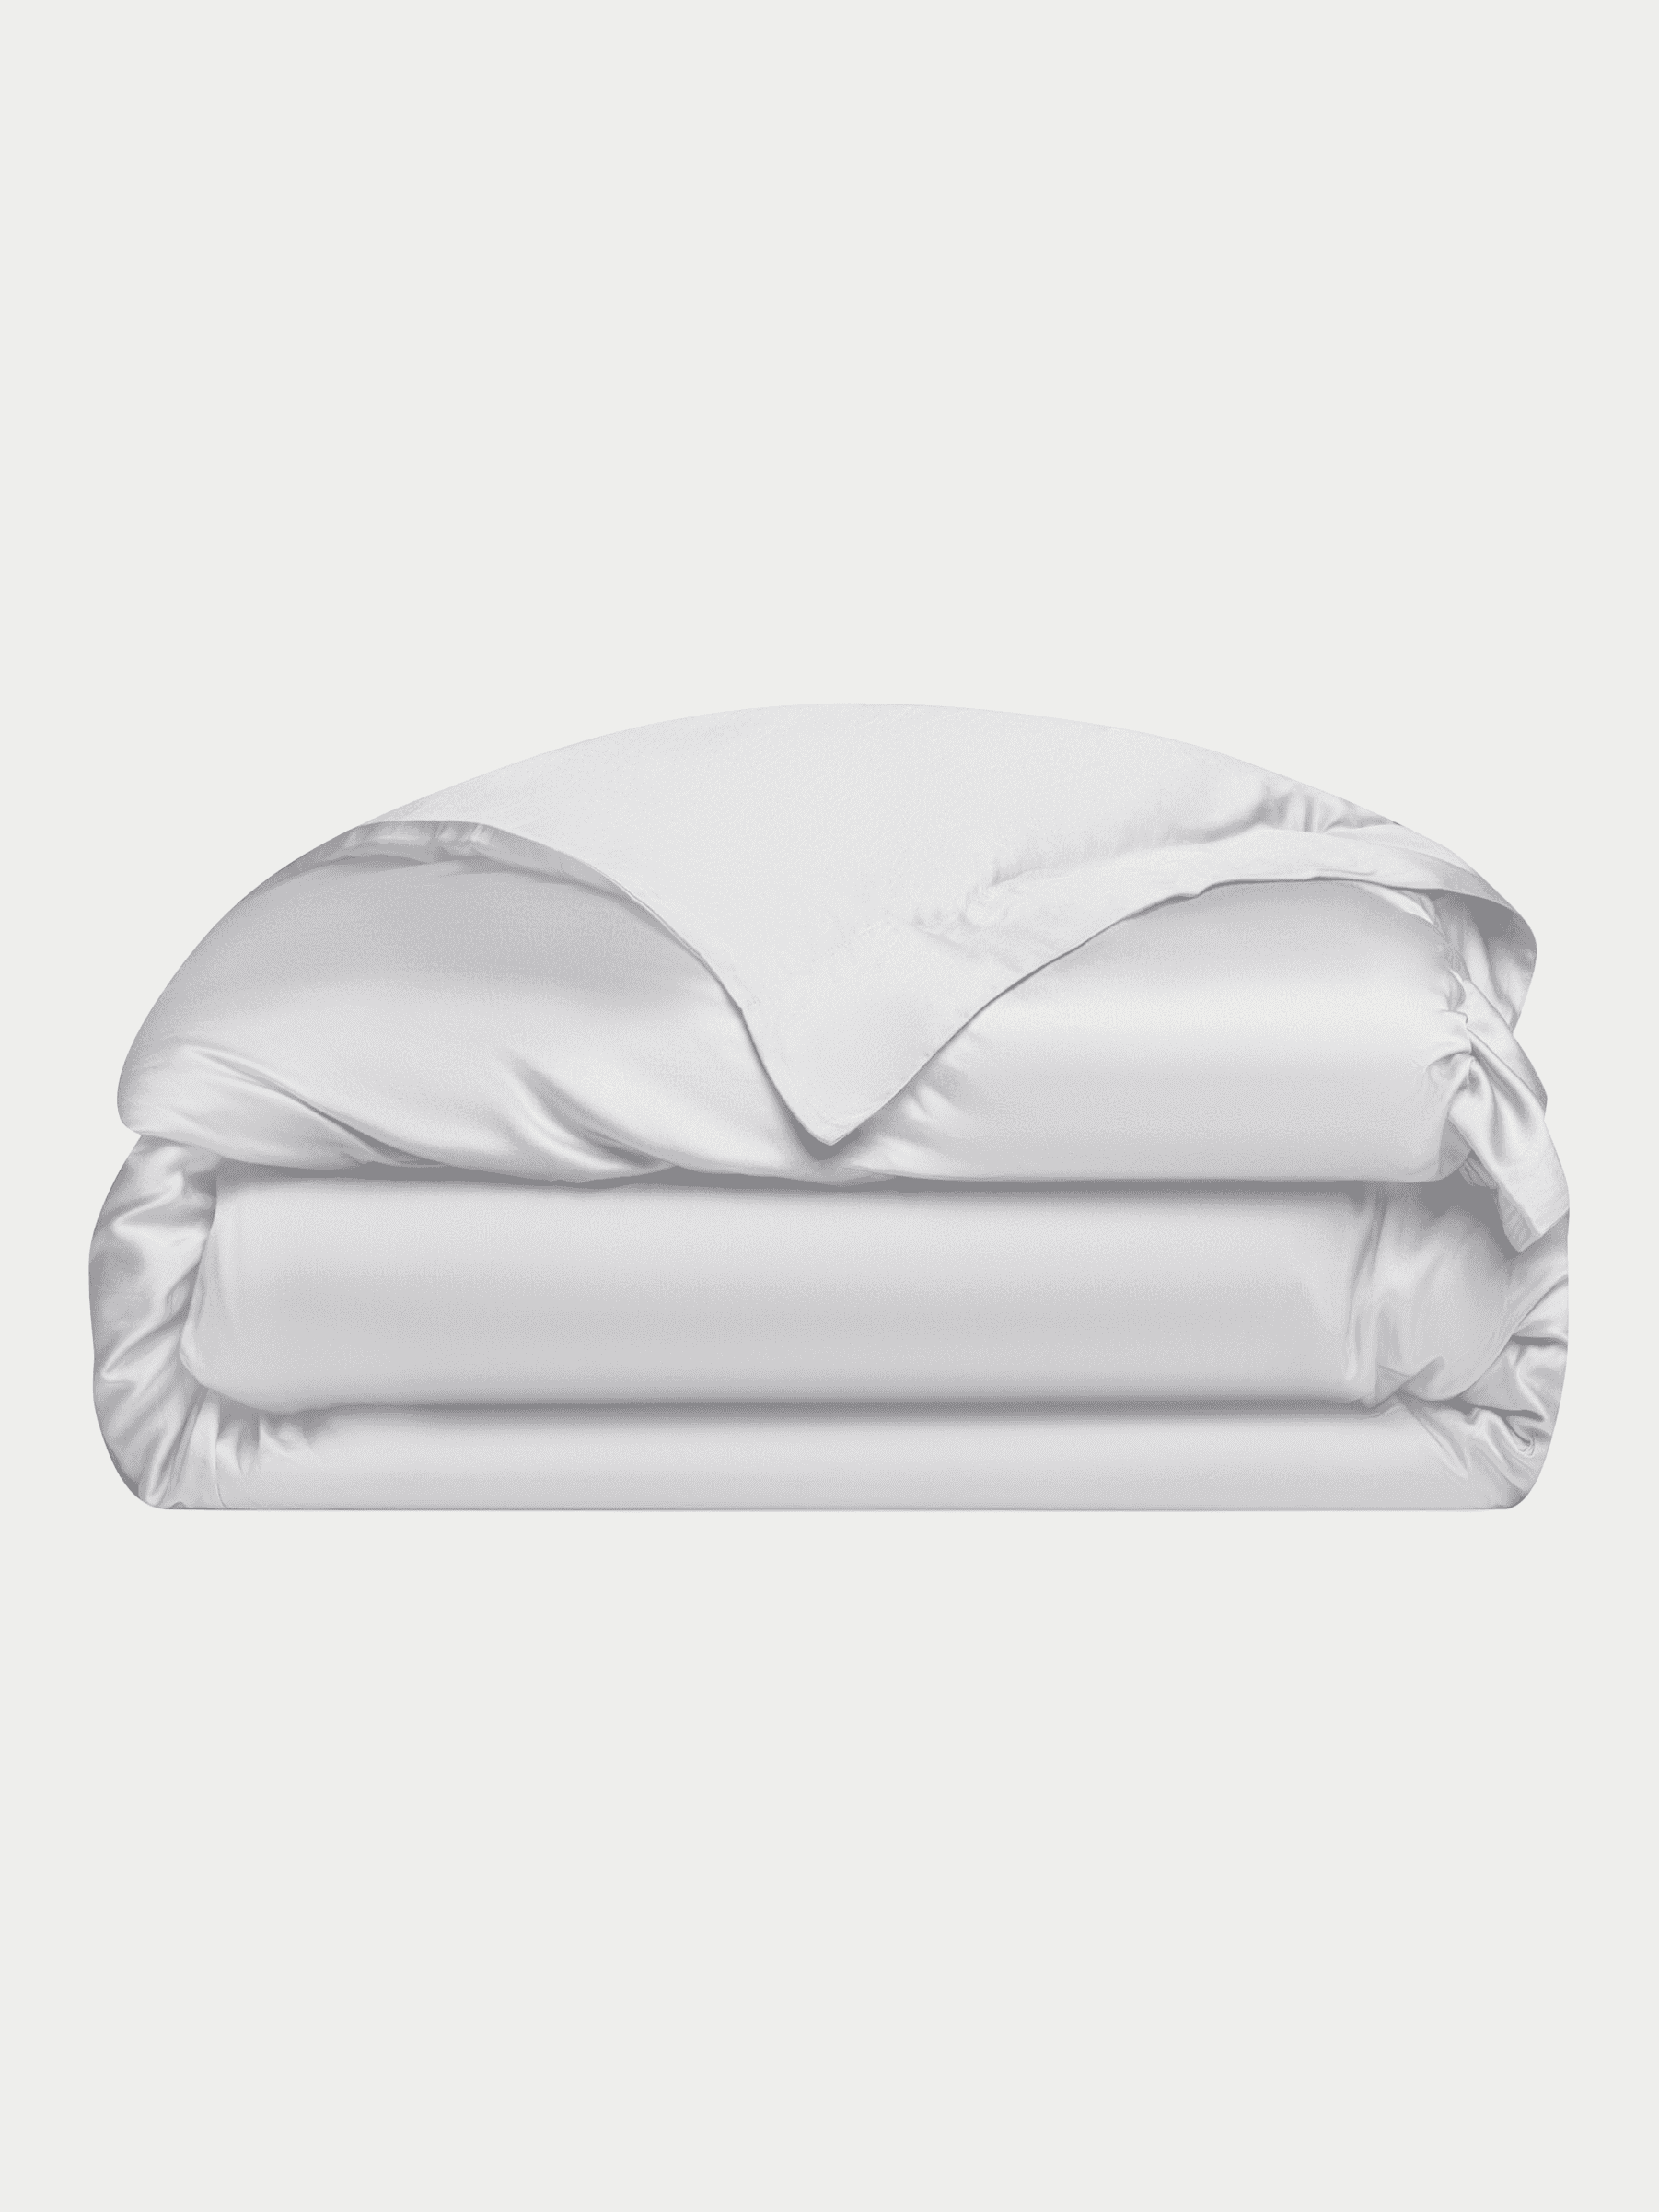 Bamboo Viscose Duvet Cover in White (Size: King) - Cozy Earth